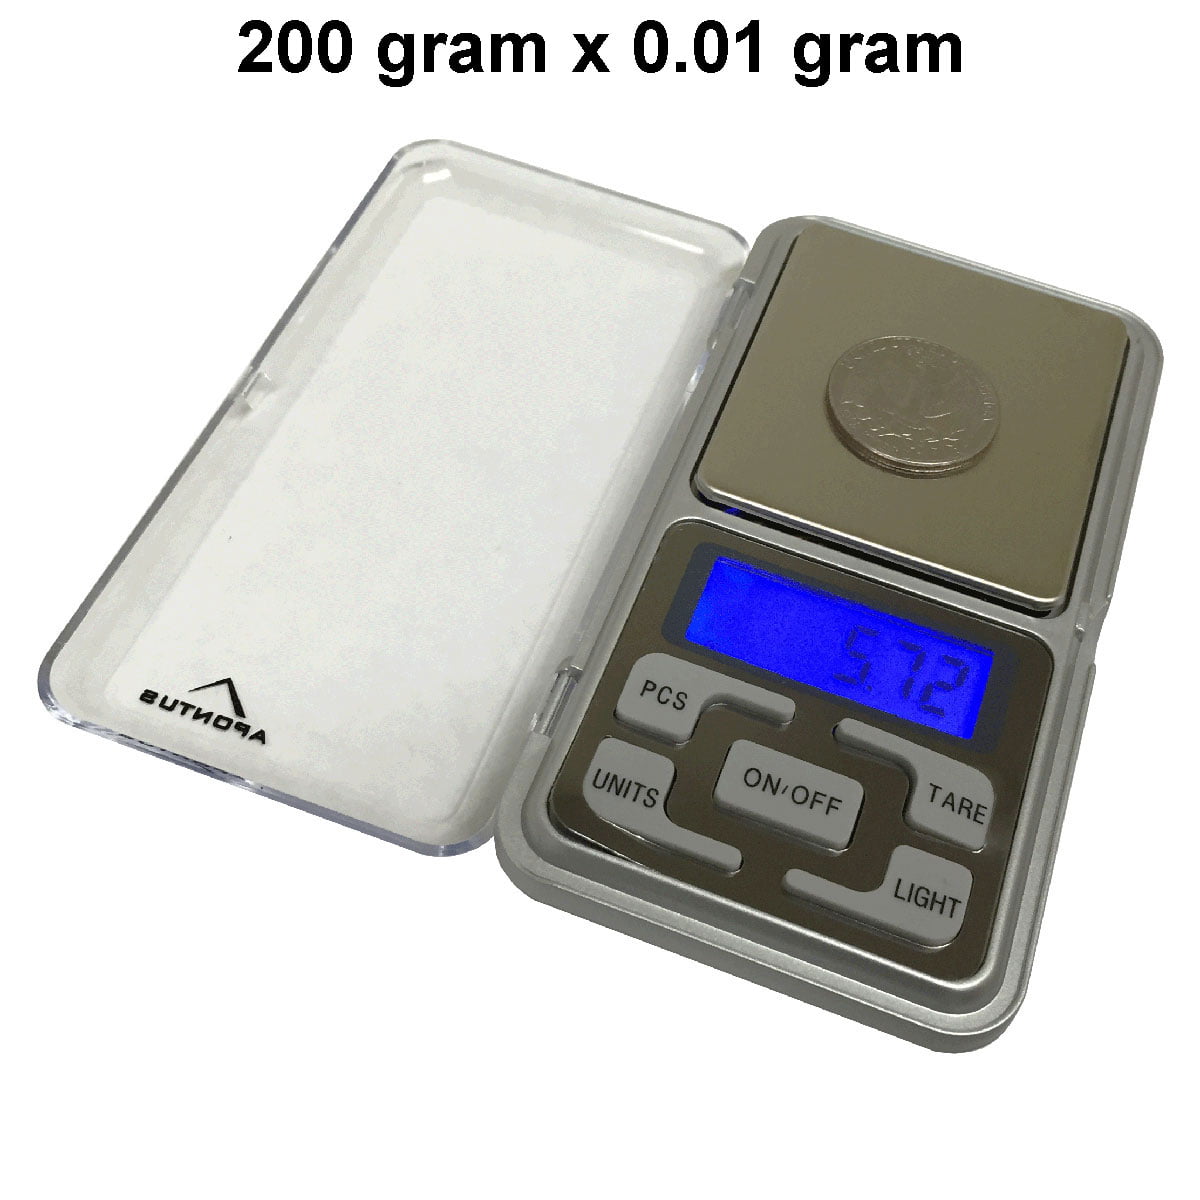 Portable Palm Jewelry Pocket Scale Digital Electronic with LCD Backlight L&6 